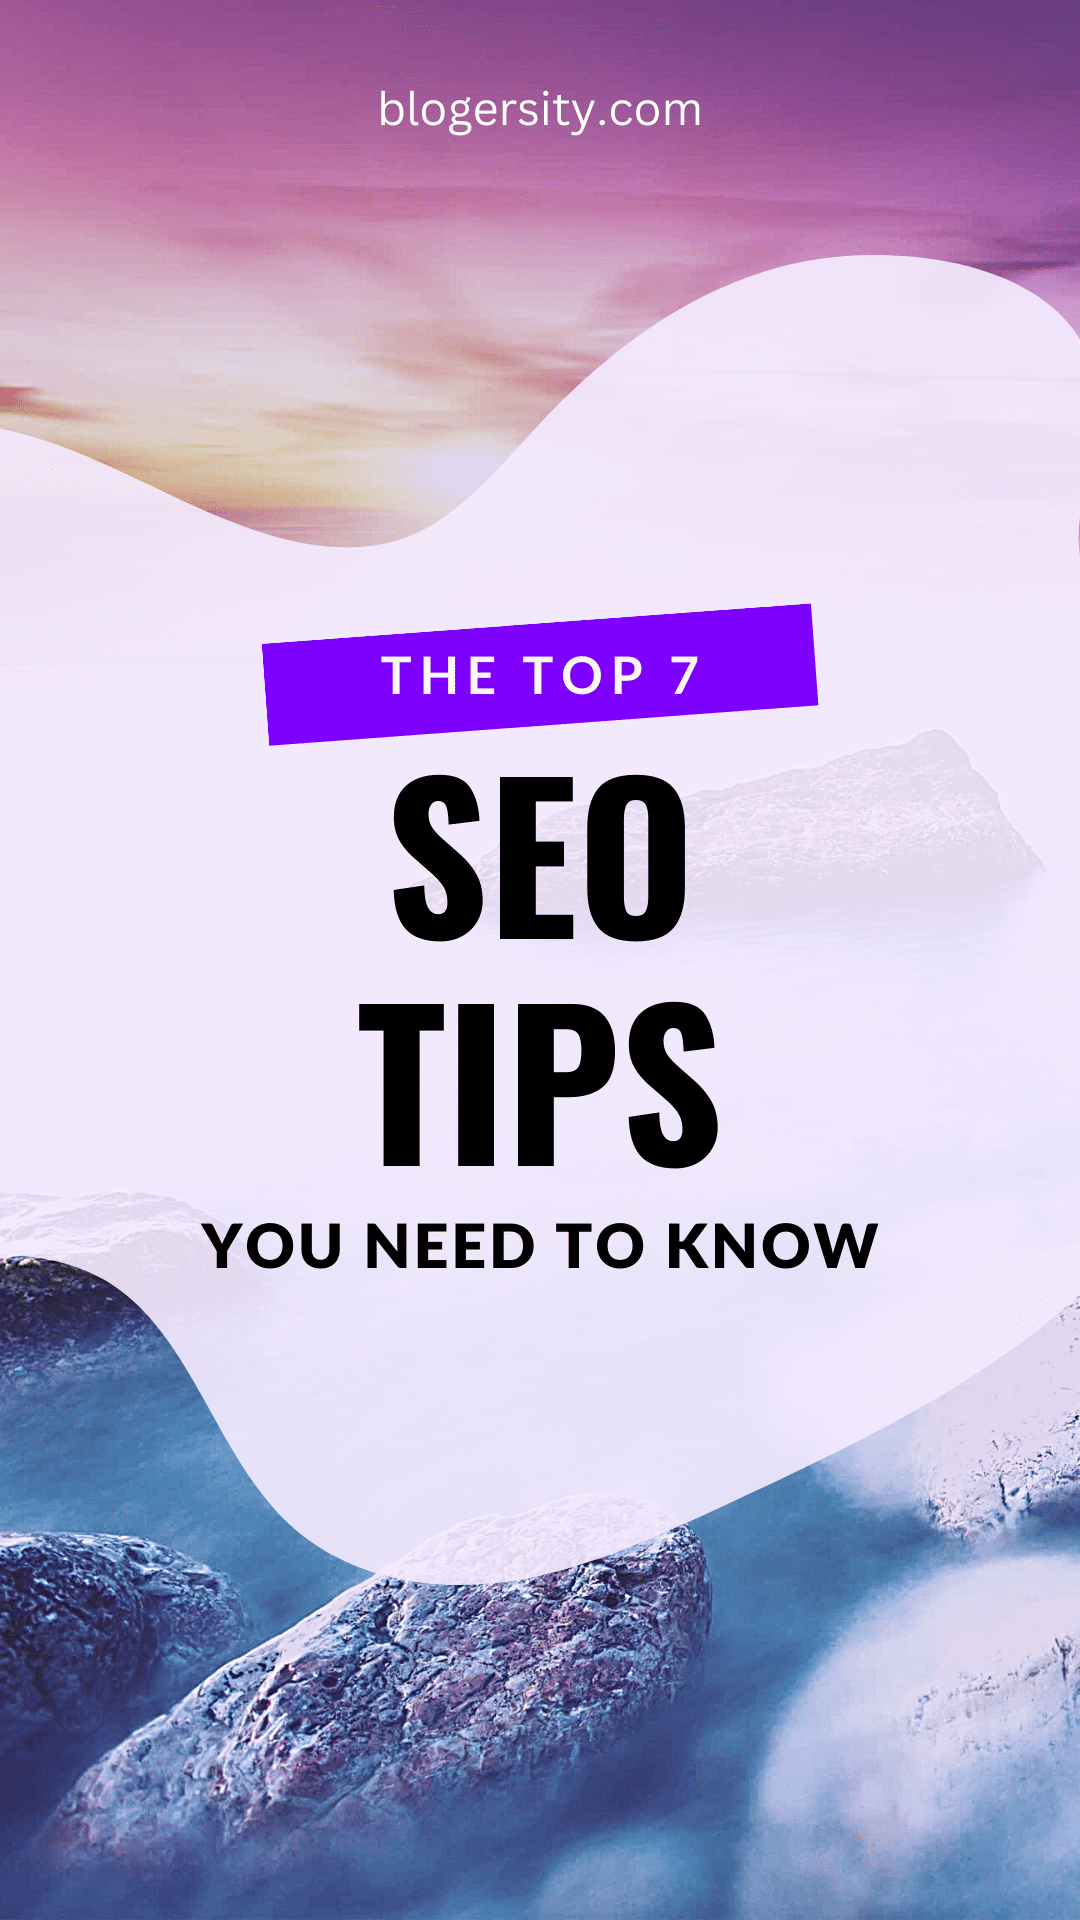 The top 7 SEO tips you need to know